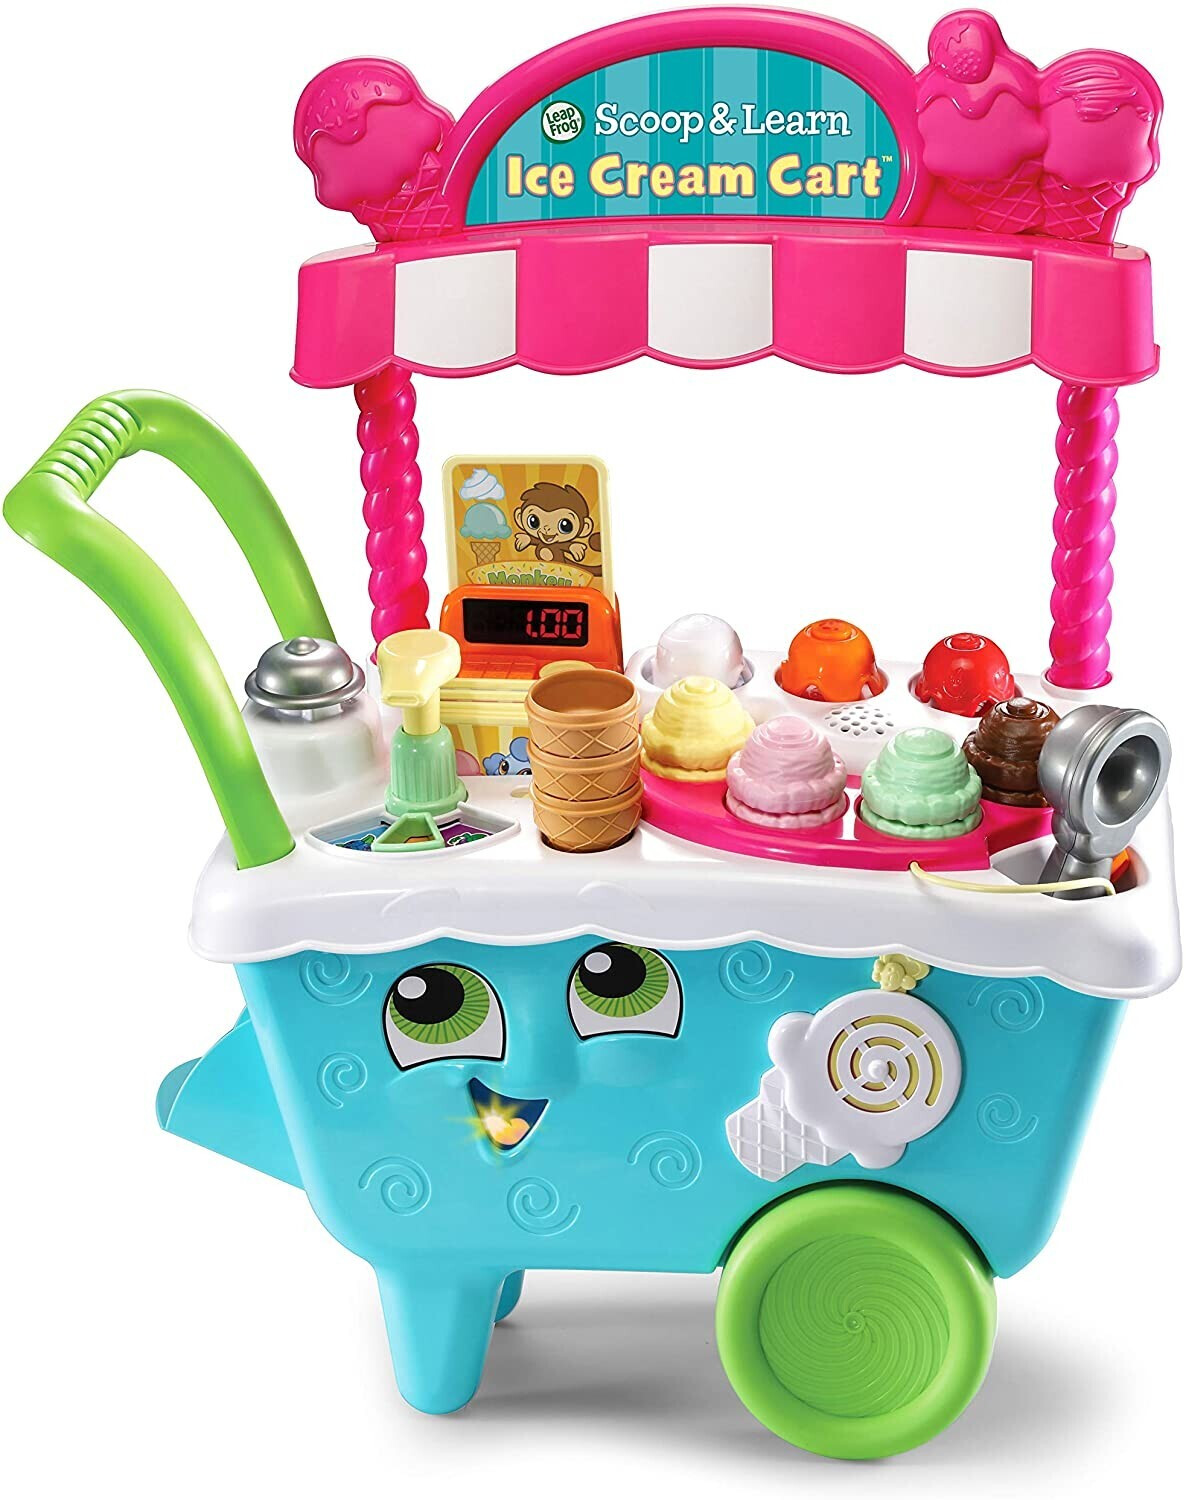 Photos - Other Toys Leapfrog Scoop & Learn Ice Cream Cart 